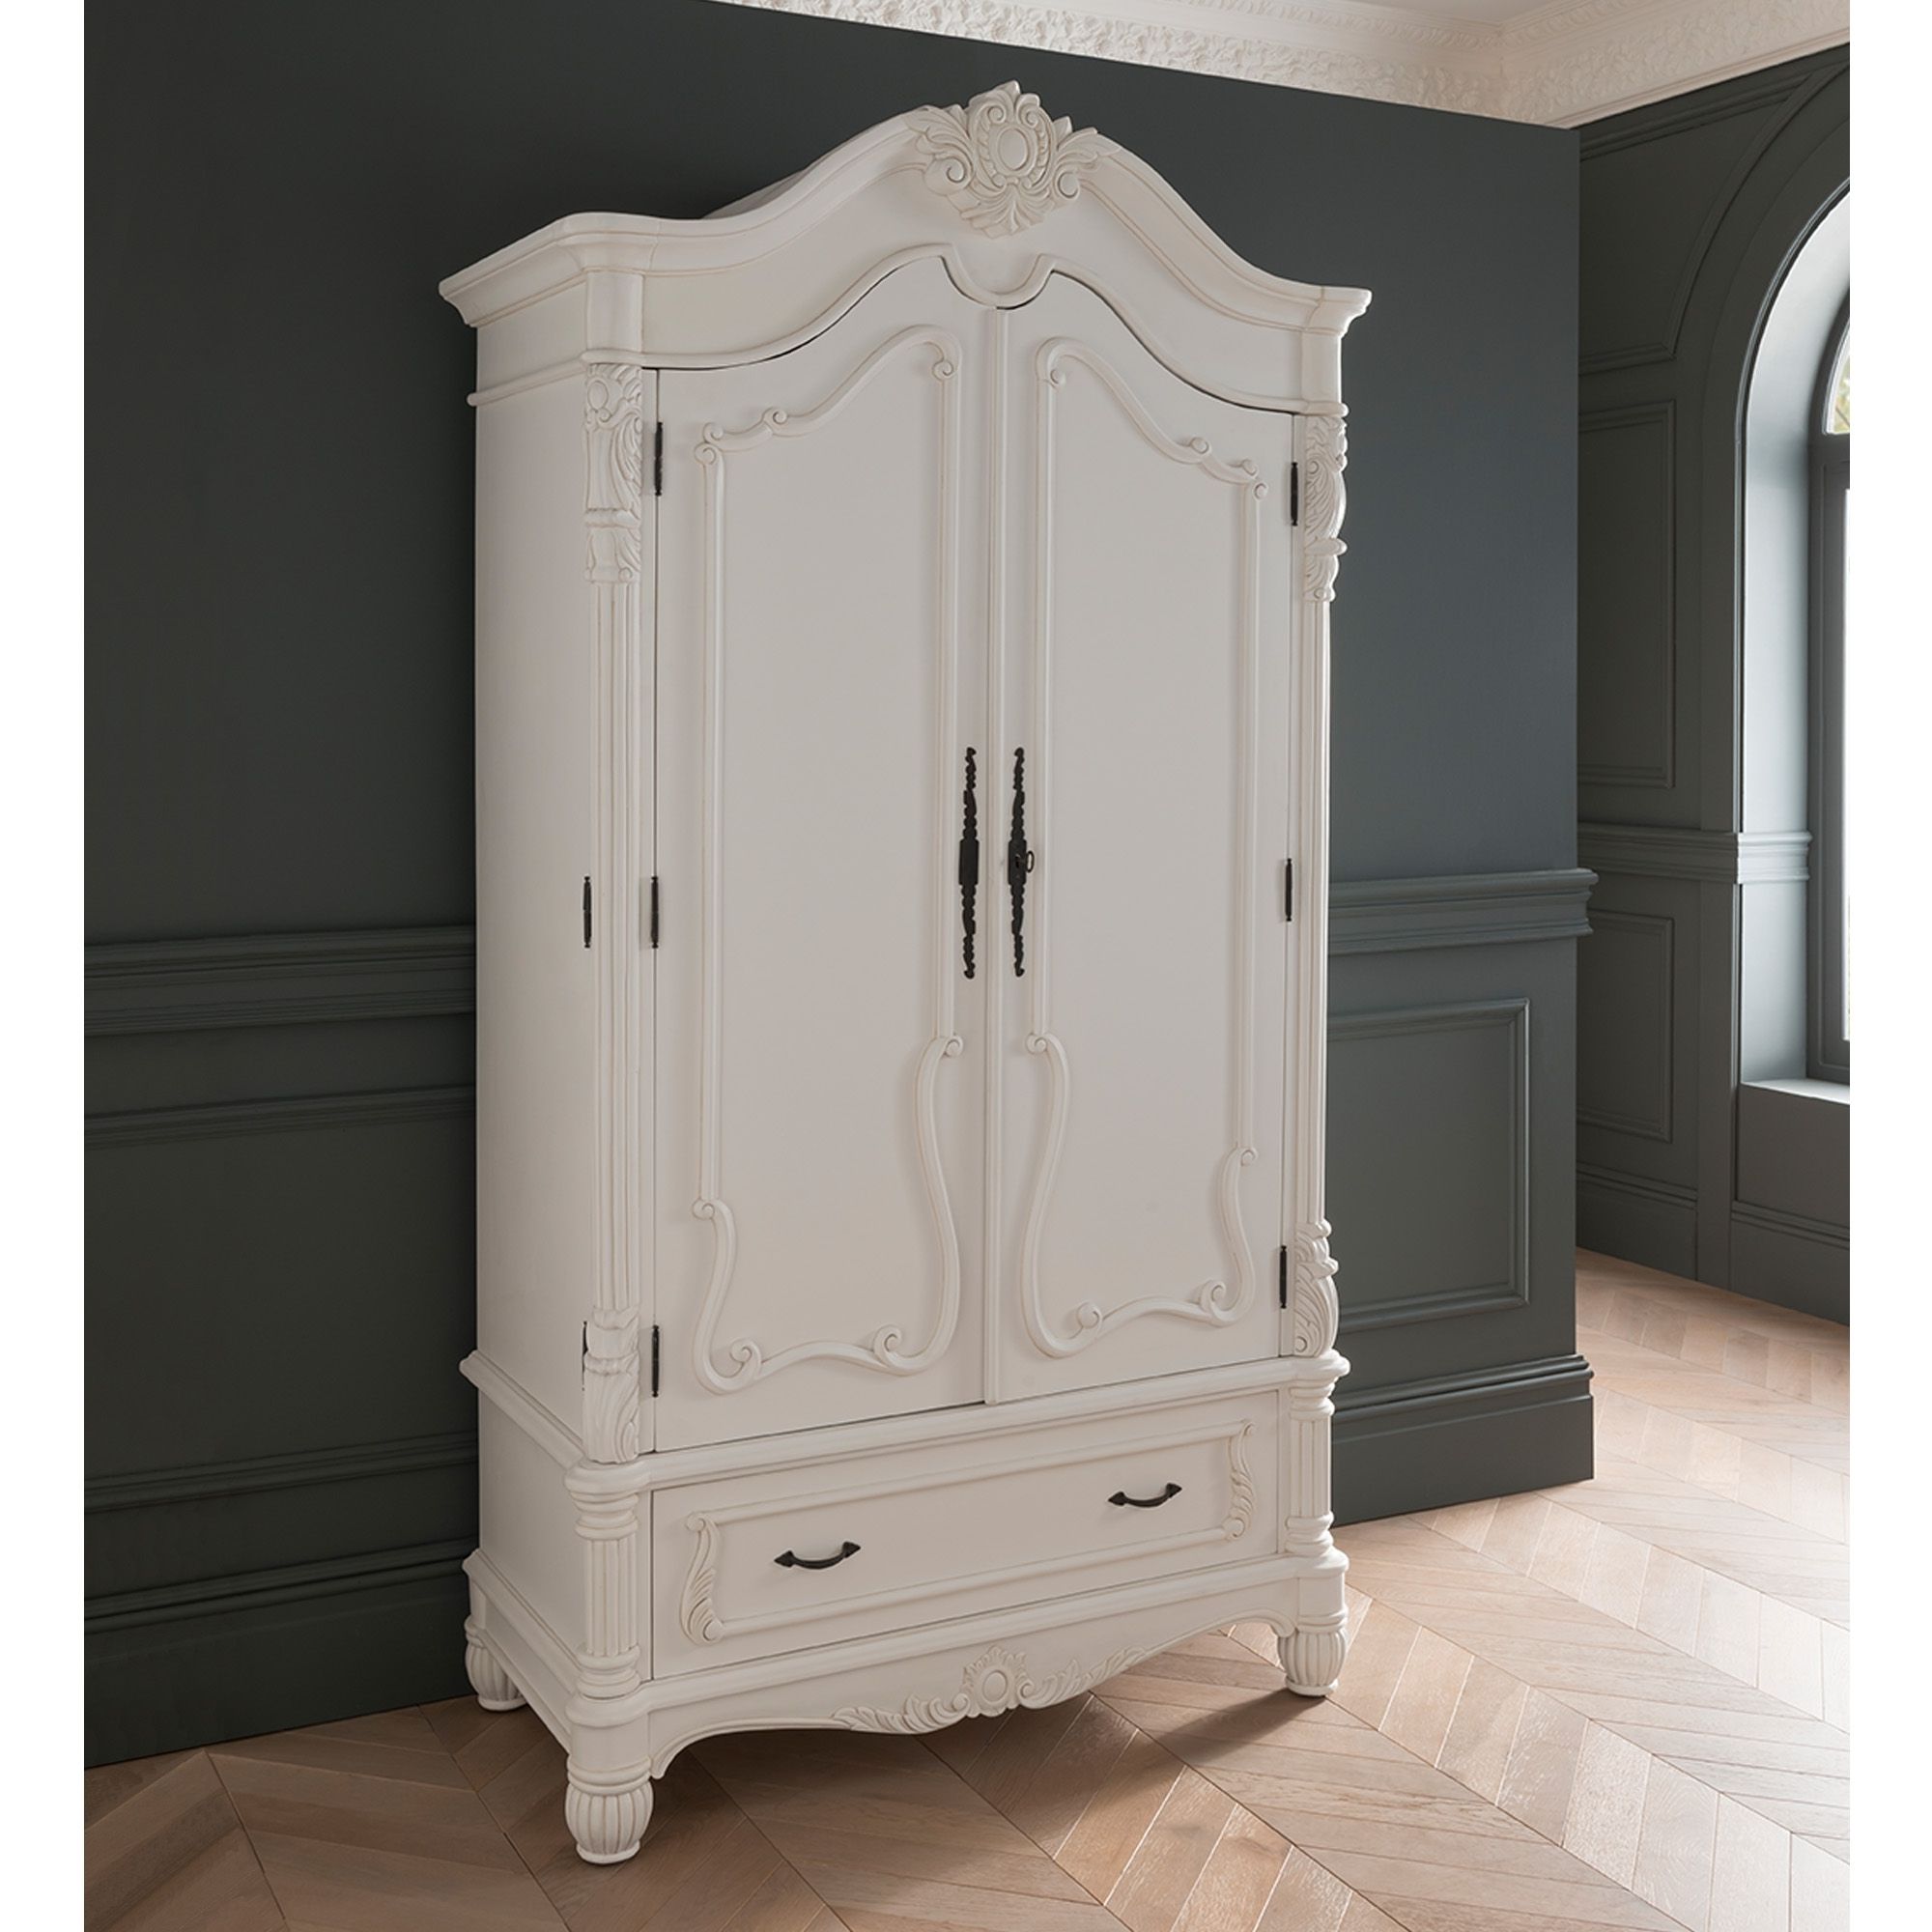 Antique French Style White Finished 1 Drawer Wardrobe | Homesdirect365 Throughout Antique French Wardrobes (View 12 of 20)